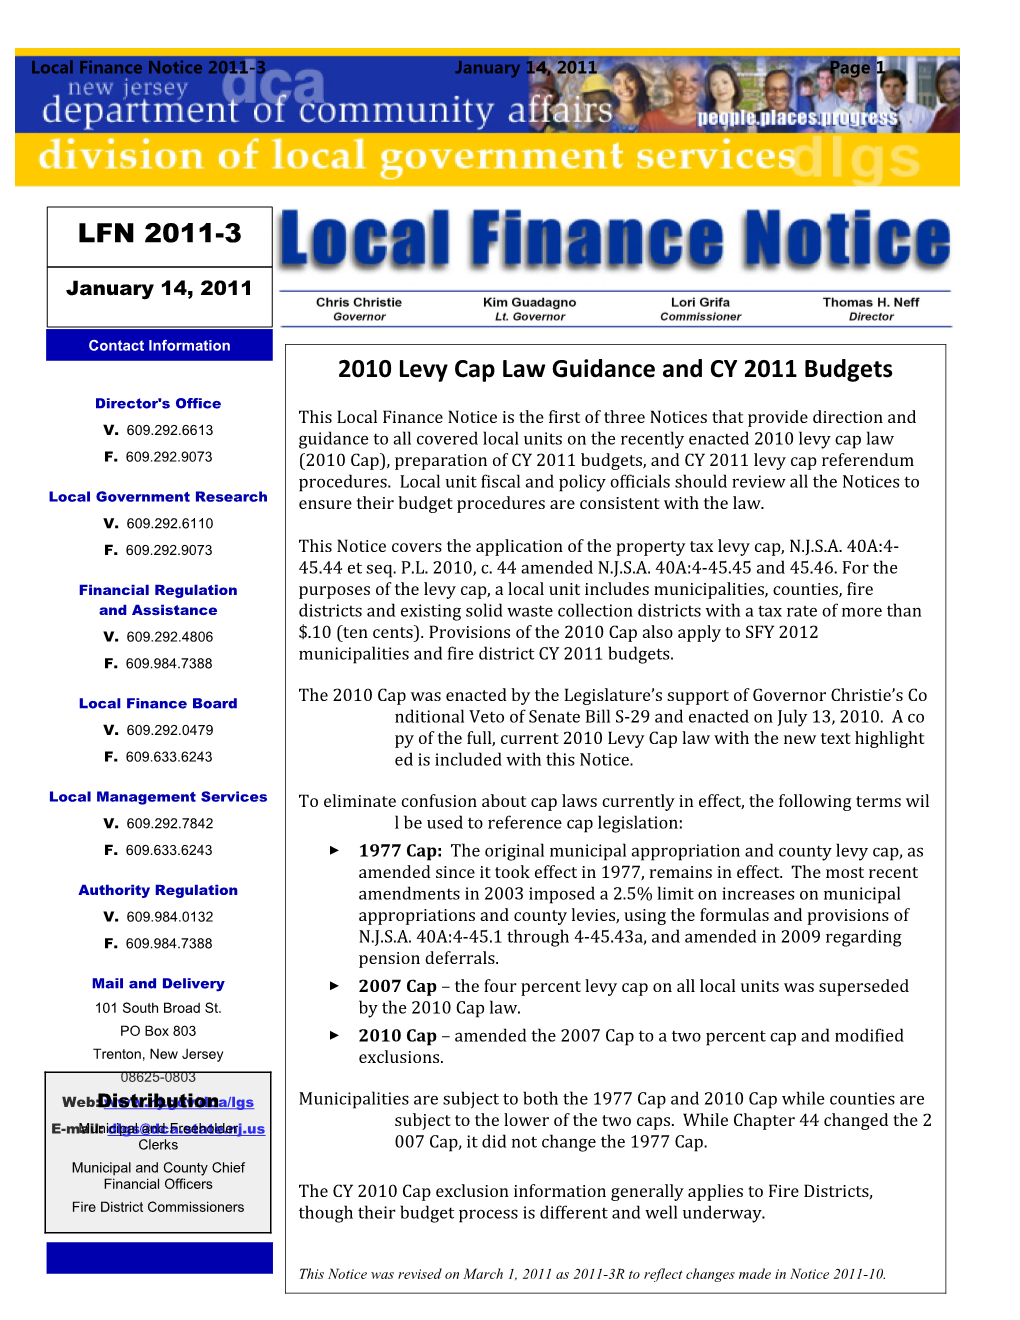 Local Finance Notice 2011-1 January 5, 2011 Page 3